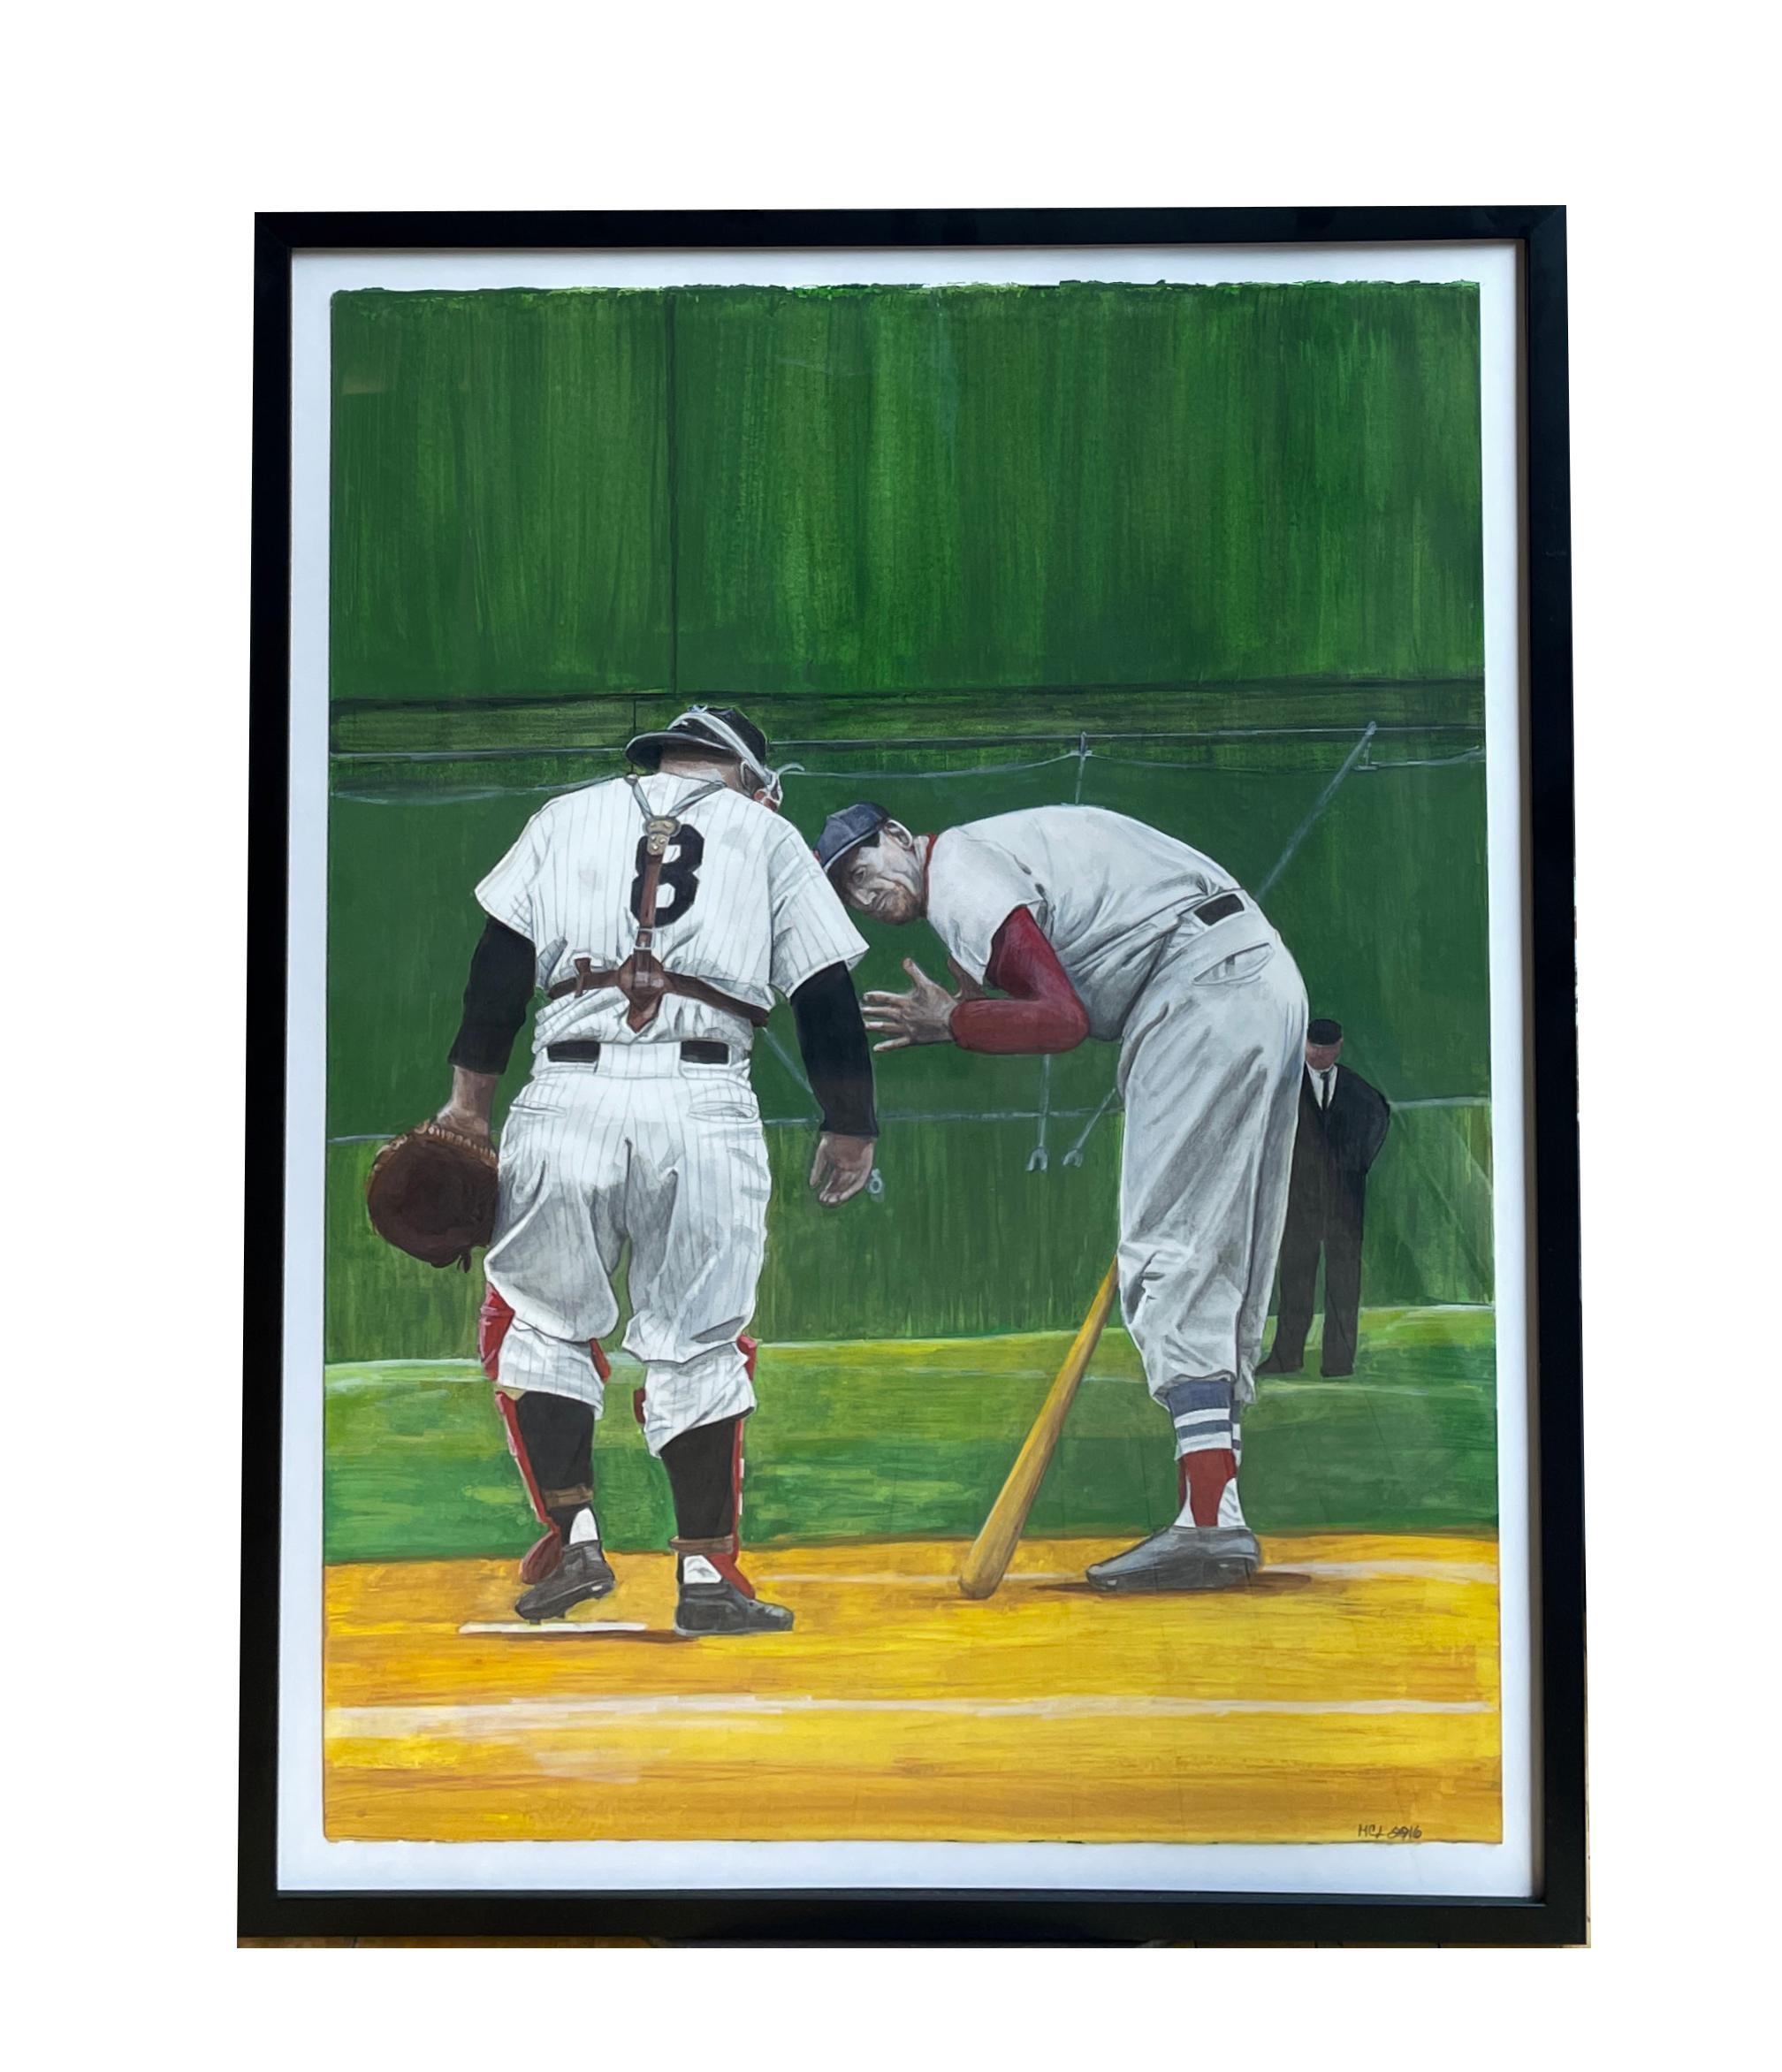 Yogi and Ted - Baseball Greats Yogi Berra and Ted Williams, Watercolor on Paper - Art by Margie Lawrence